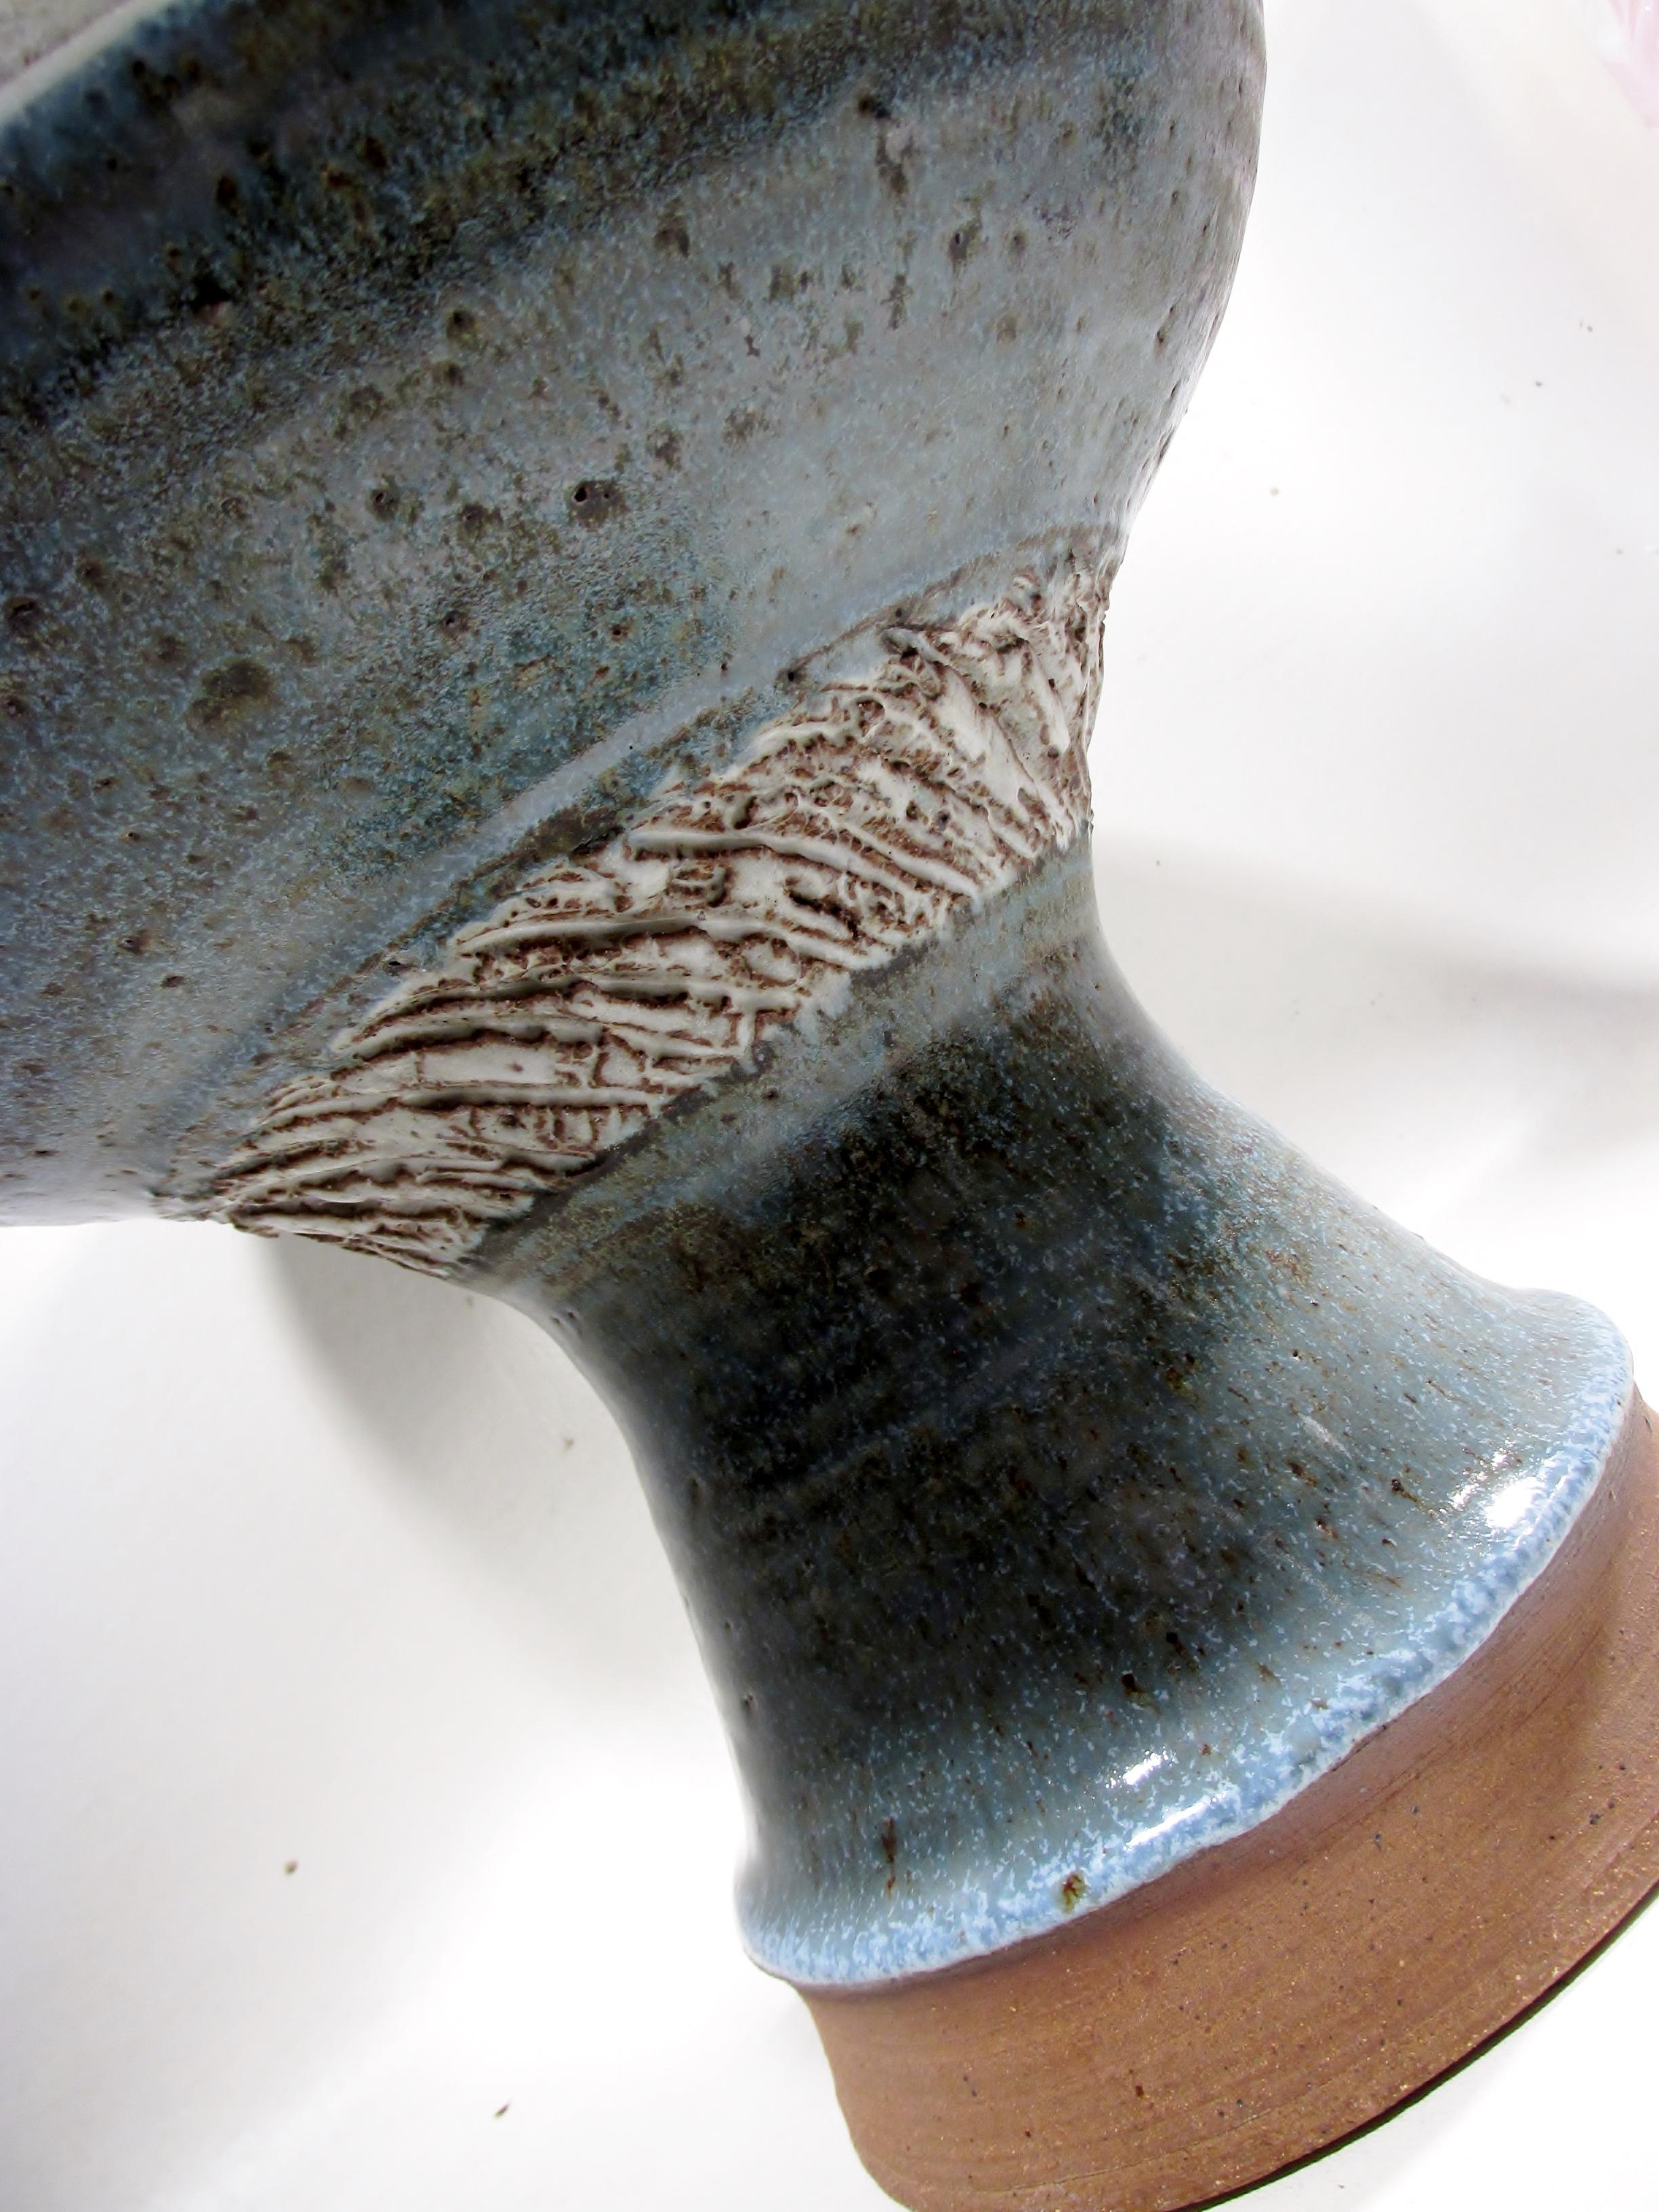 Striking and large scale 10.25” tall and 13.25” dia 1970s era American studio art pottery glazed stoneware chalice. From the studio of the renowned midcentury Colorado potter Edward “Ed” Oshier. Organic form and presence. 

Condition is excellent